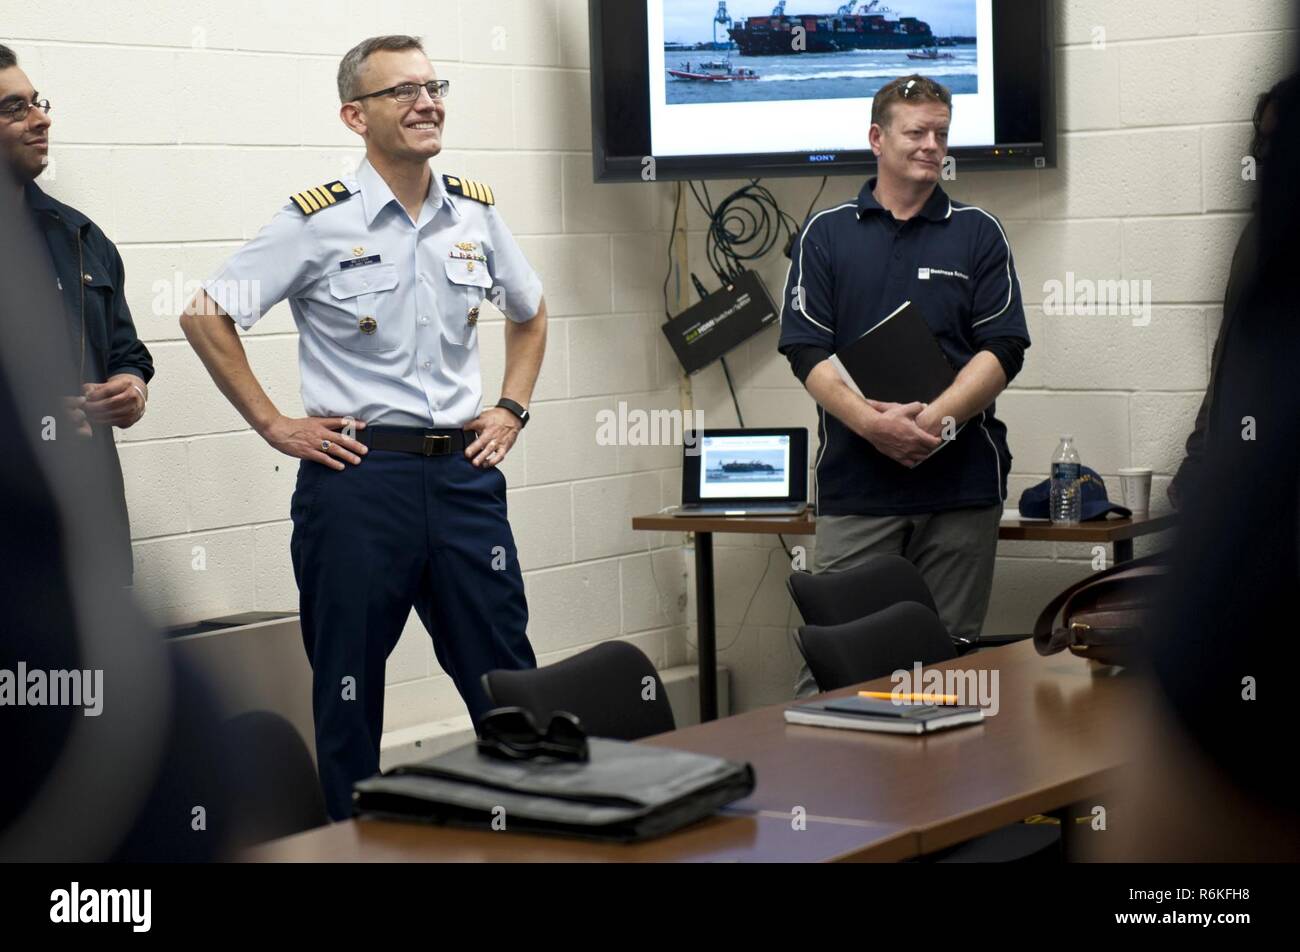 Coast Guard Cpt. Richard Wester, commander of Sector Hampton Roads in Portsmouth, Virginia, welcomes students from Queensland University of Technology in Brisbane, Queensland, Australia, during their tour of sector May 25, 2017. During the question and answer session, QUT students asked Wester about the structure of Sector Hampton Roads and about how the Coast Guard works with local, state and federal agencies. Stock Photo